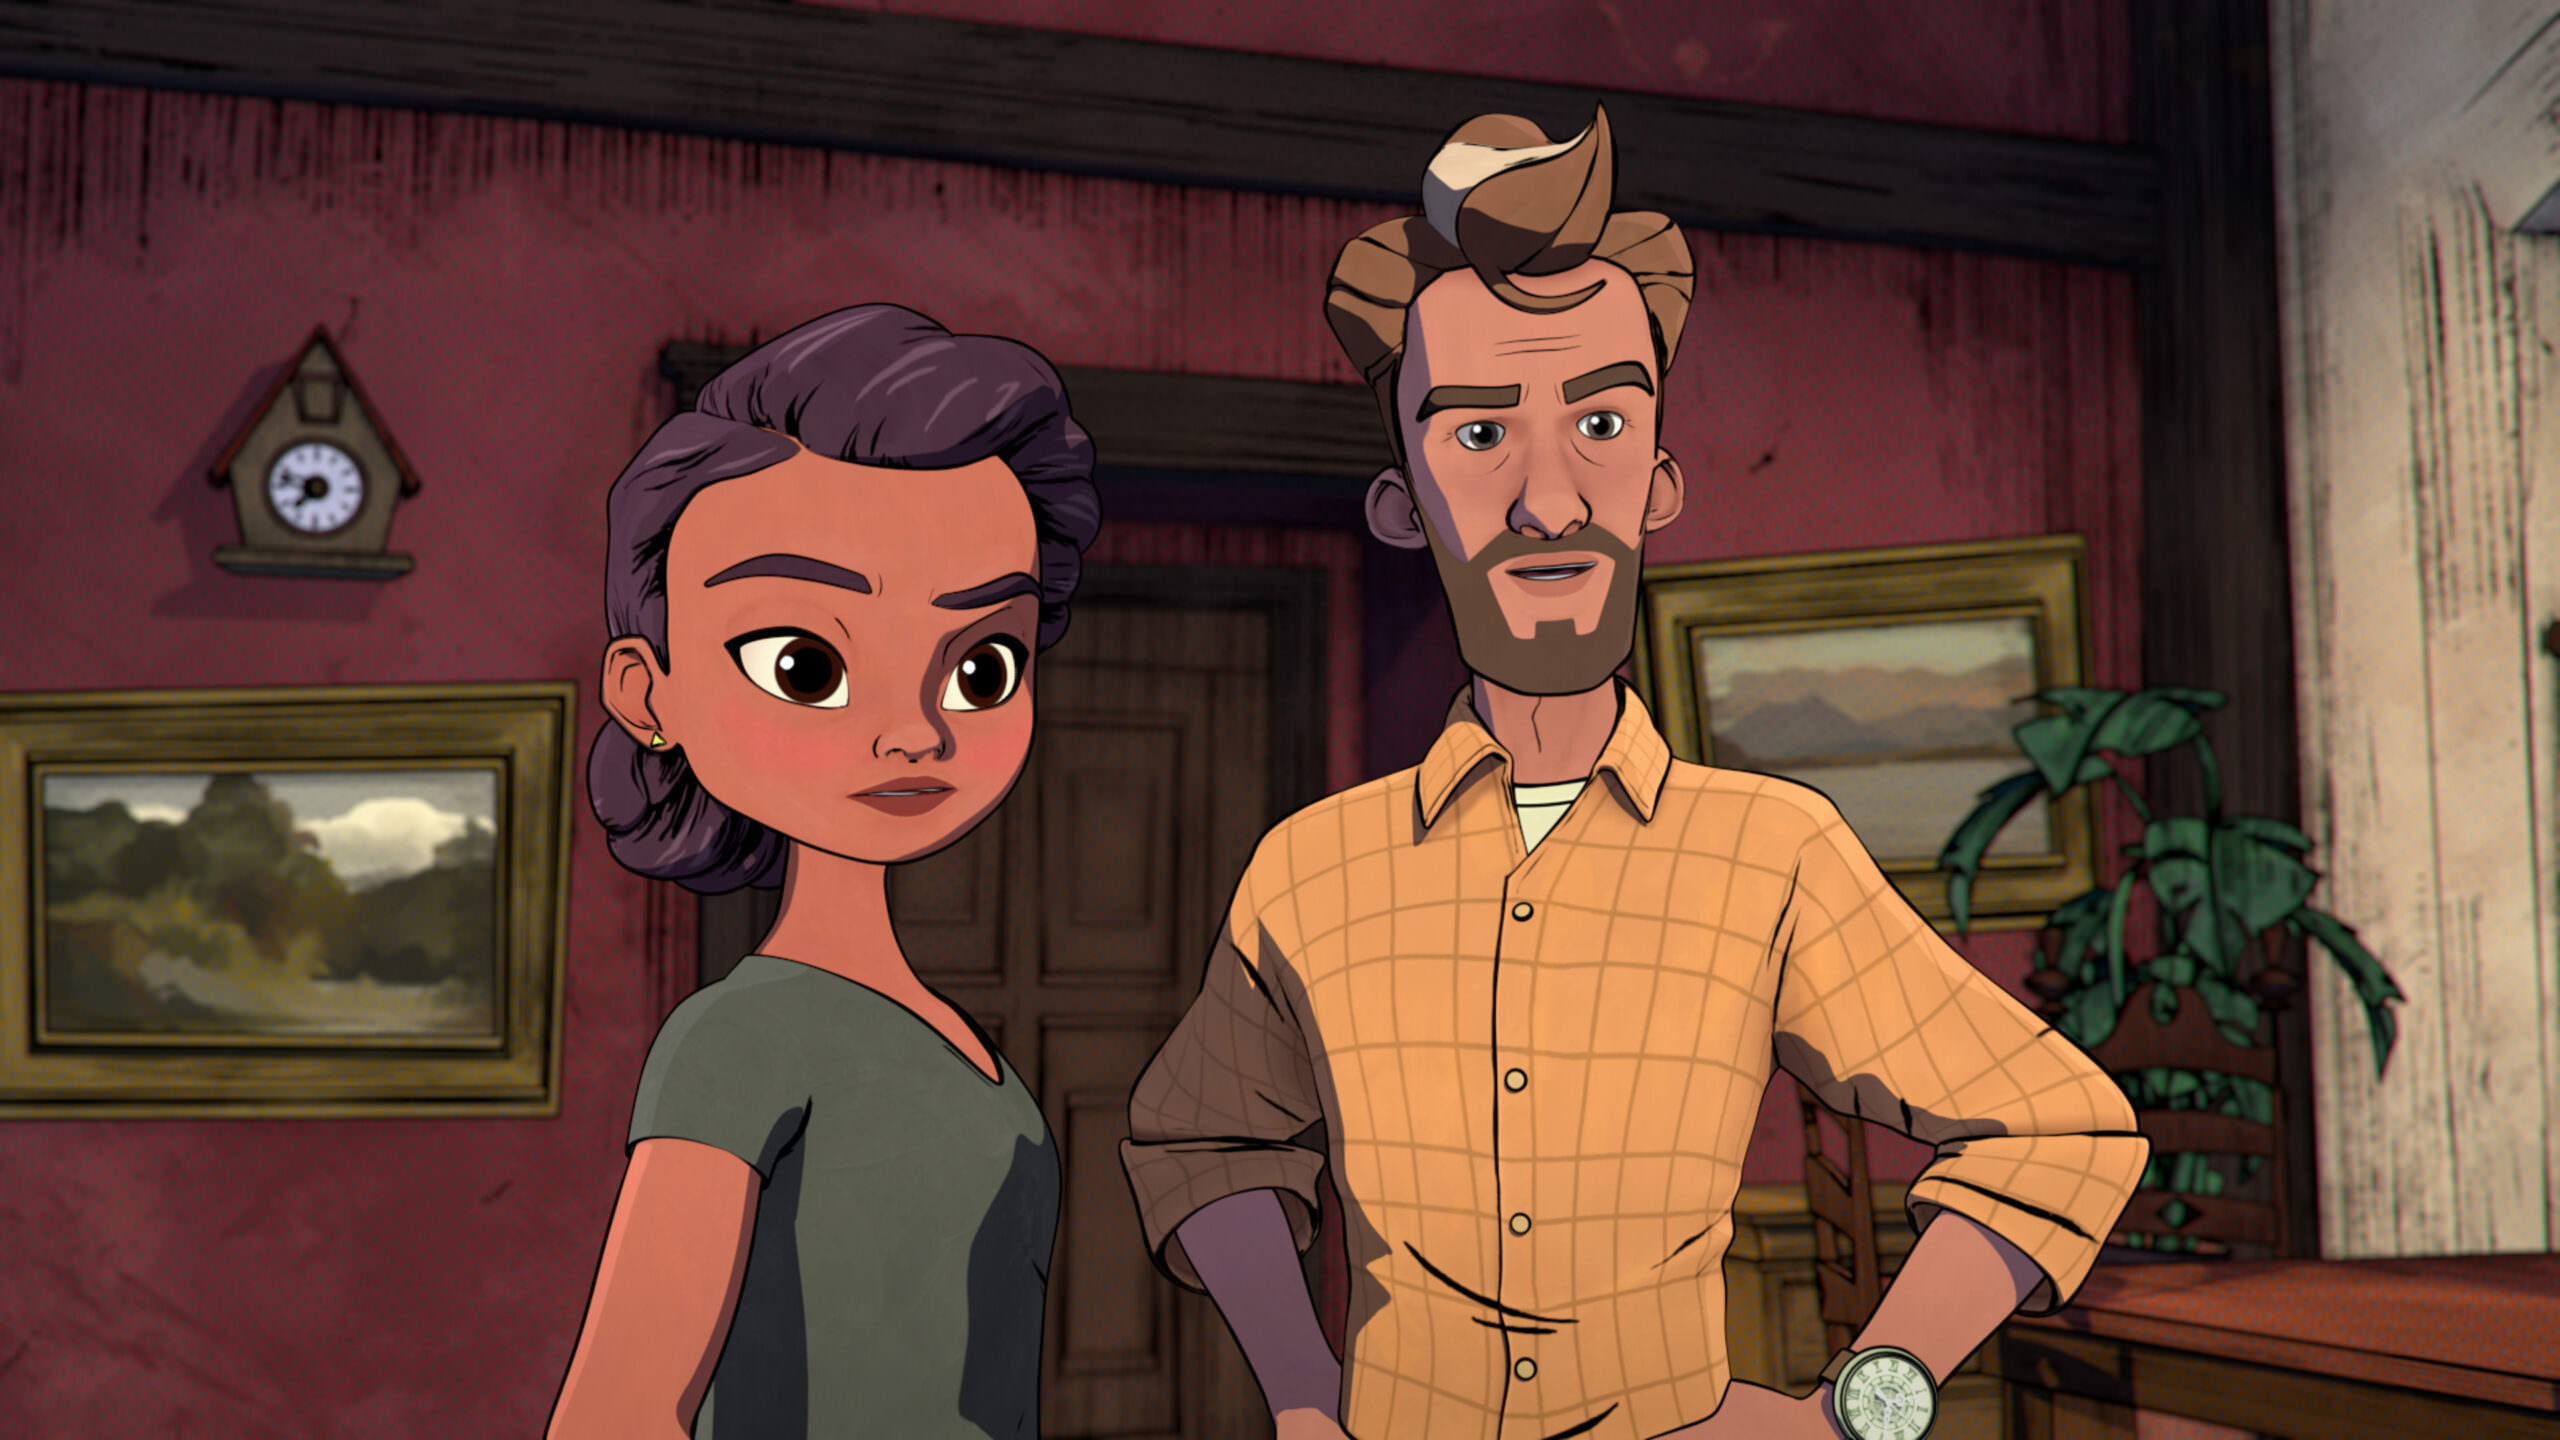 Sky (voiced by Lyric Lewis) and Alex Vanderhouven (voiced by Reid Scott) in "CURSES!," now streaming on Apple TV+.